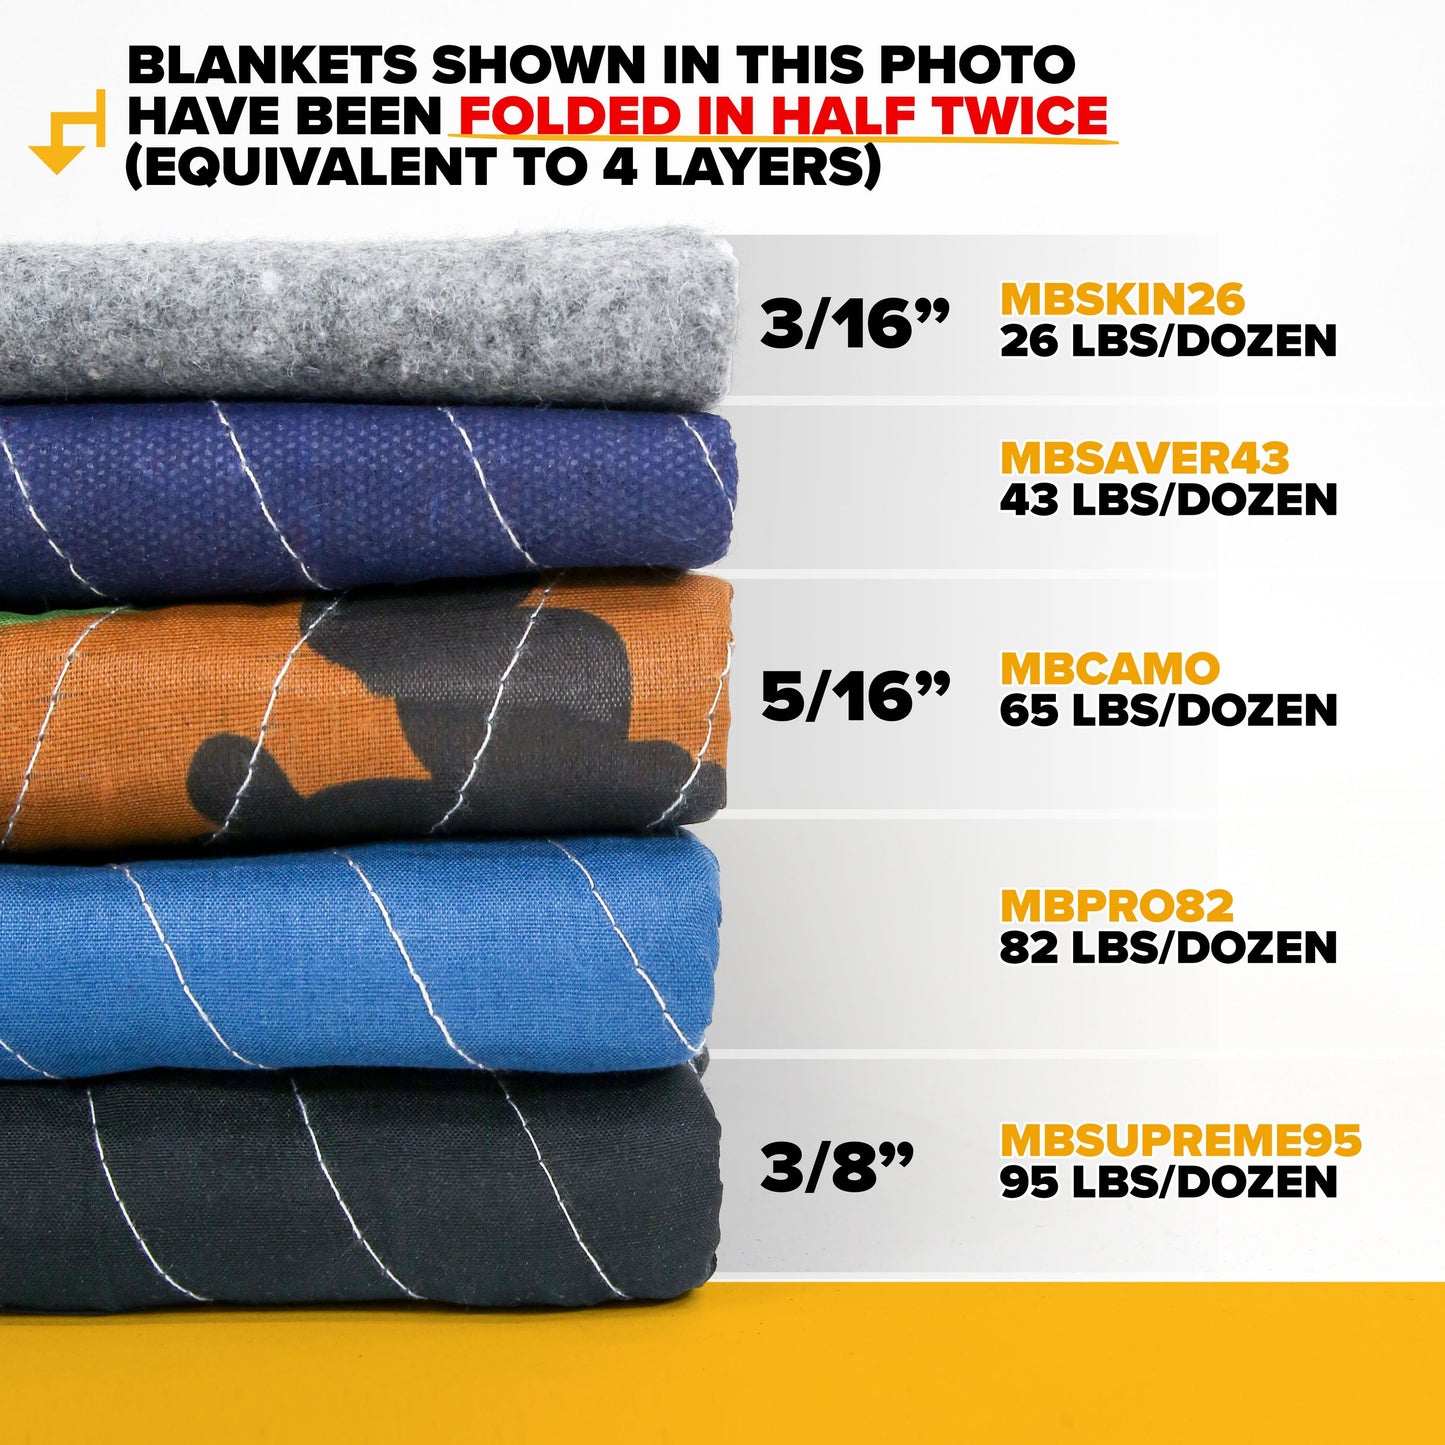 Moving Blankets- Econo Deluxe 12-Pack, 65 lbs./dozen image 5 of 11